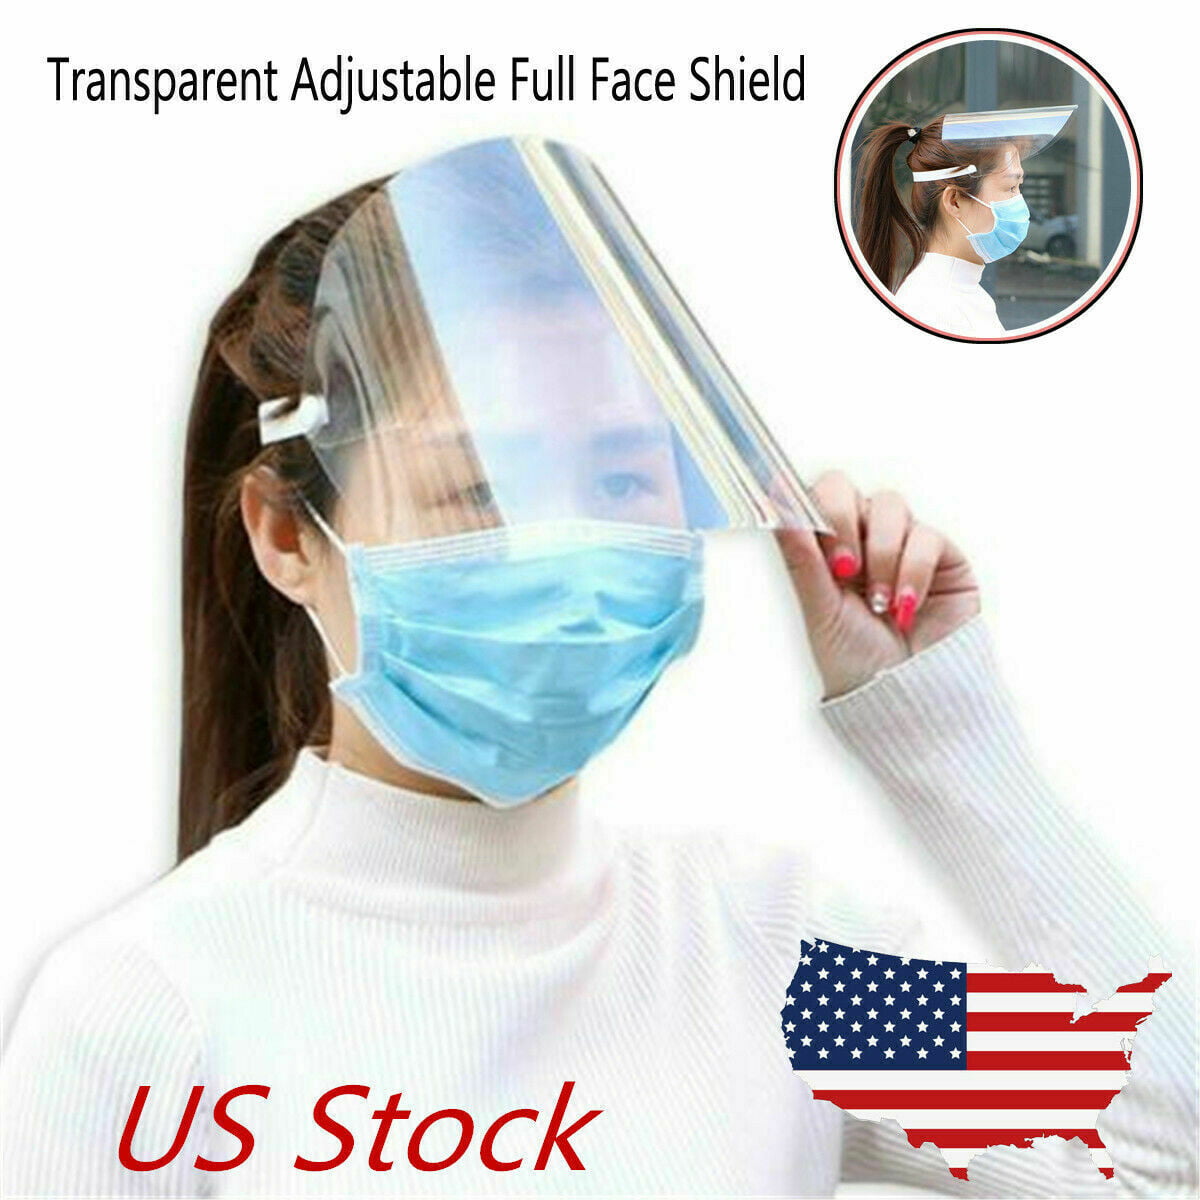 Safety Full Face Shield Clear Glasses Protector Anti-Fog Work Industry Dental 